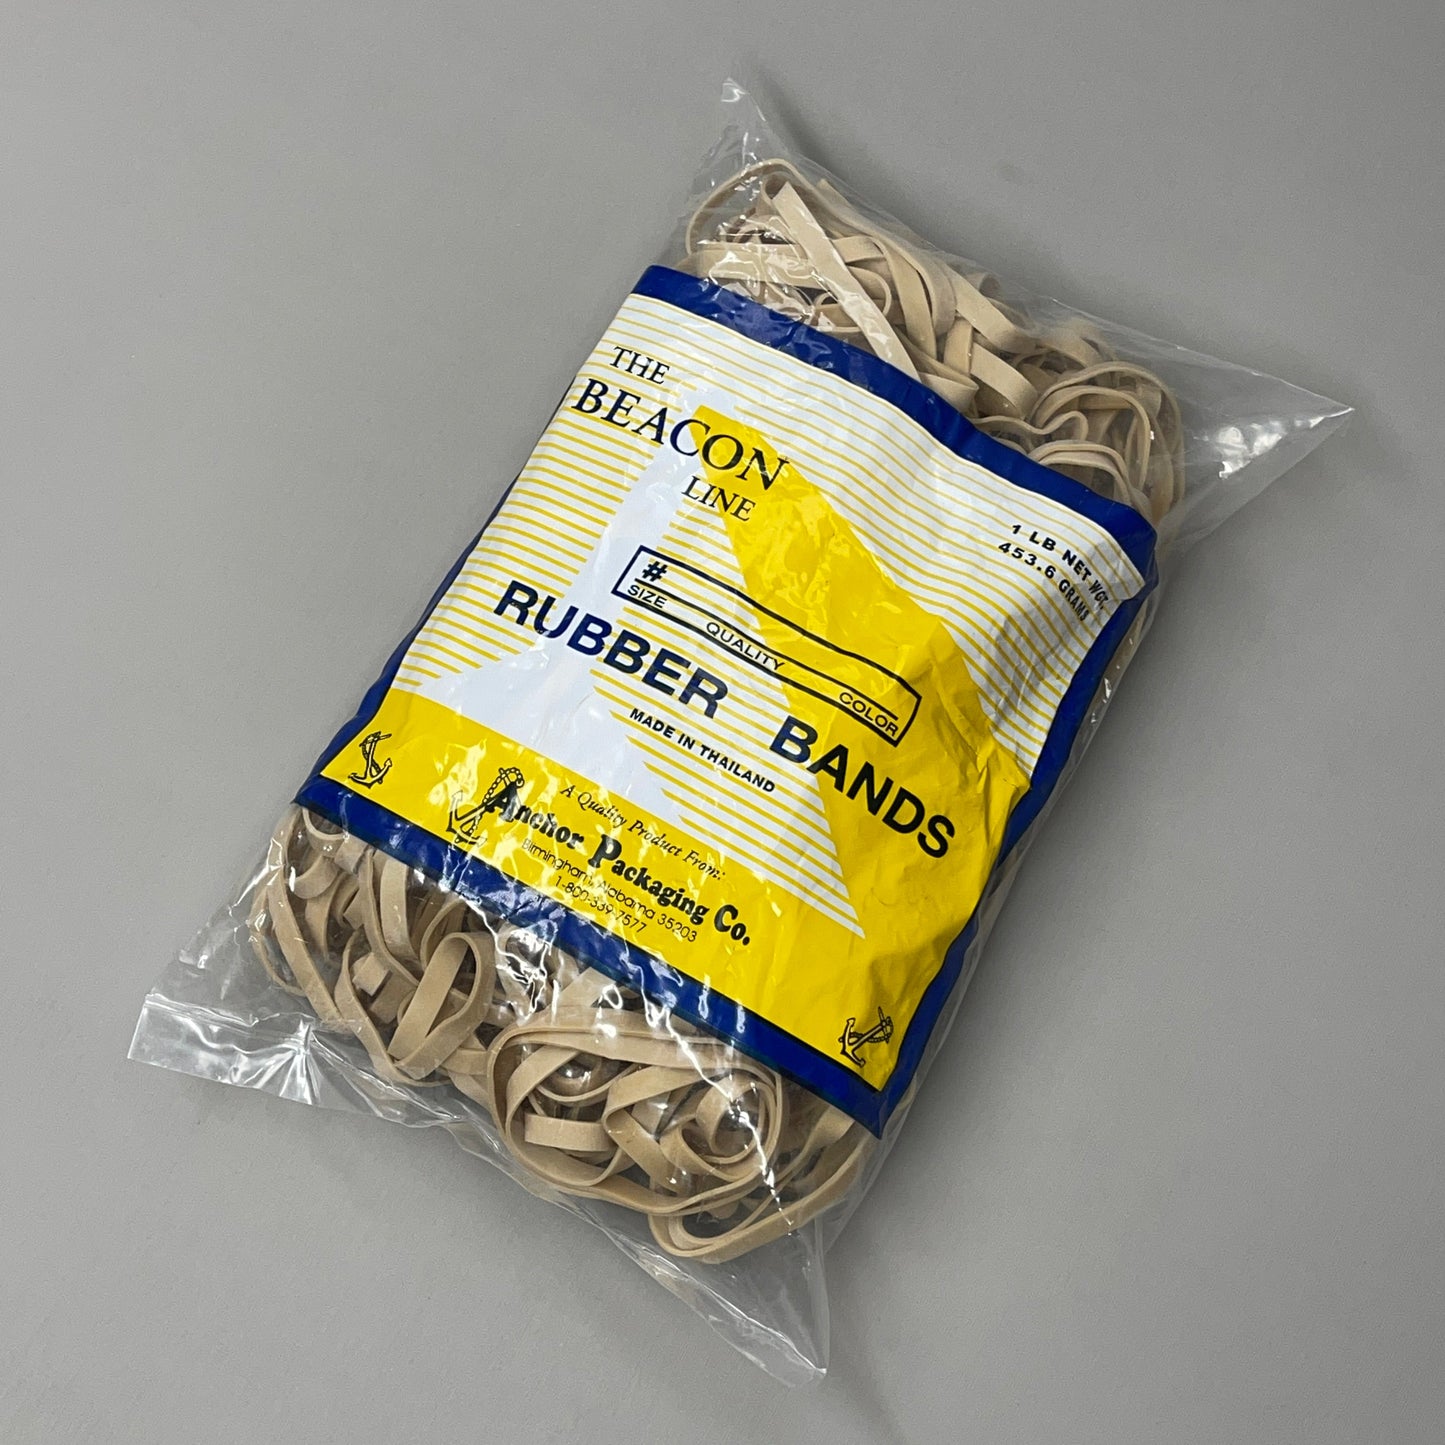 za@ ANCHOR PACKAGING CO The Beacon Line Rubber Bands 3 lbs Total (3 x 1 lb Bags) Size 64 (New) B